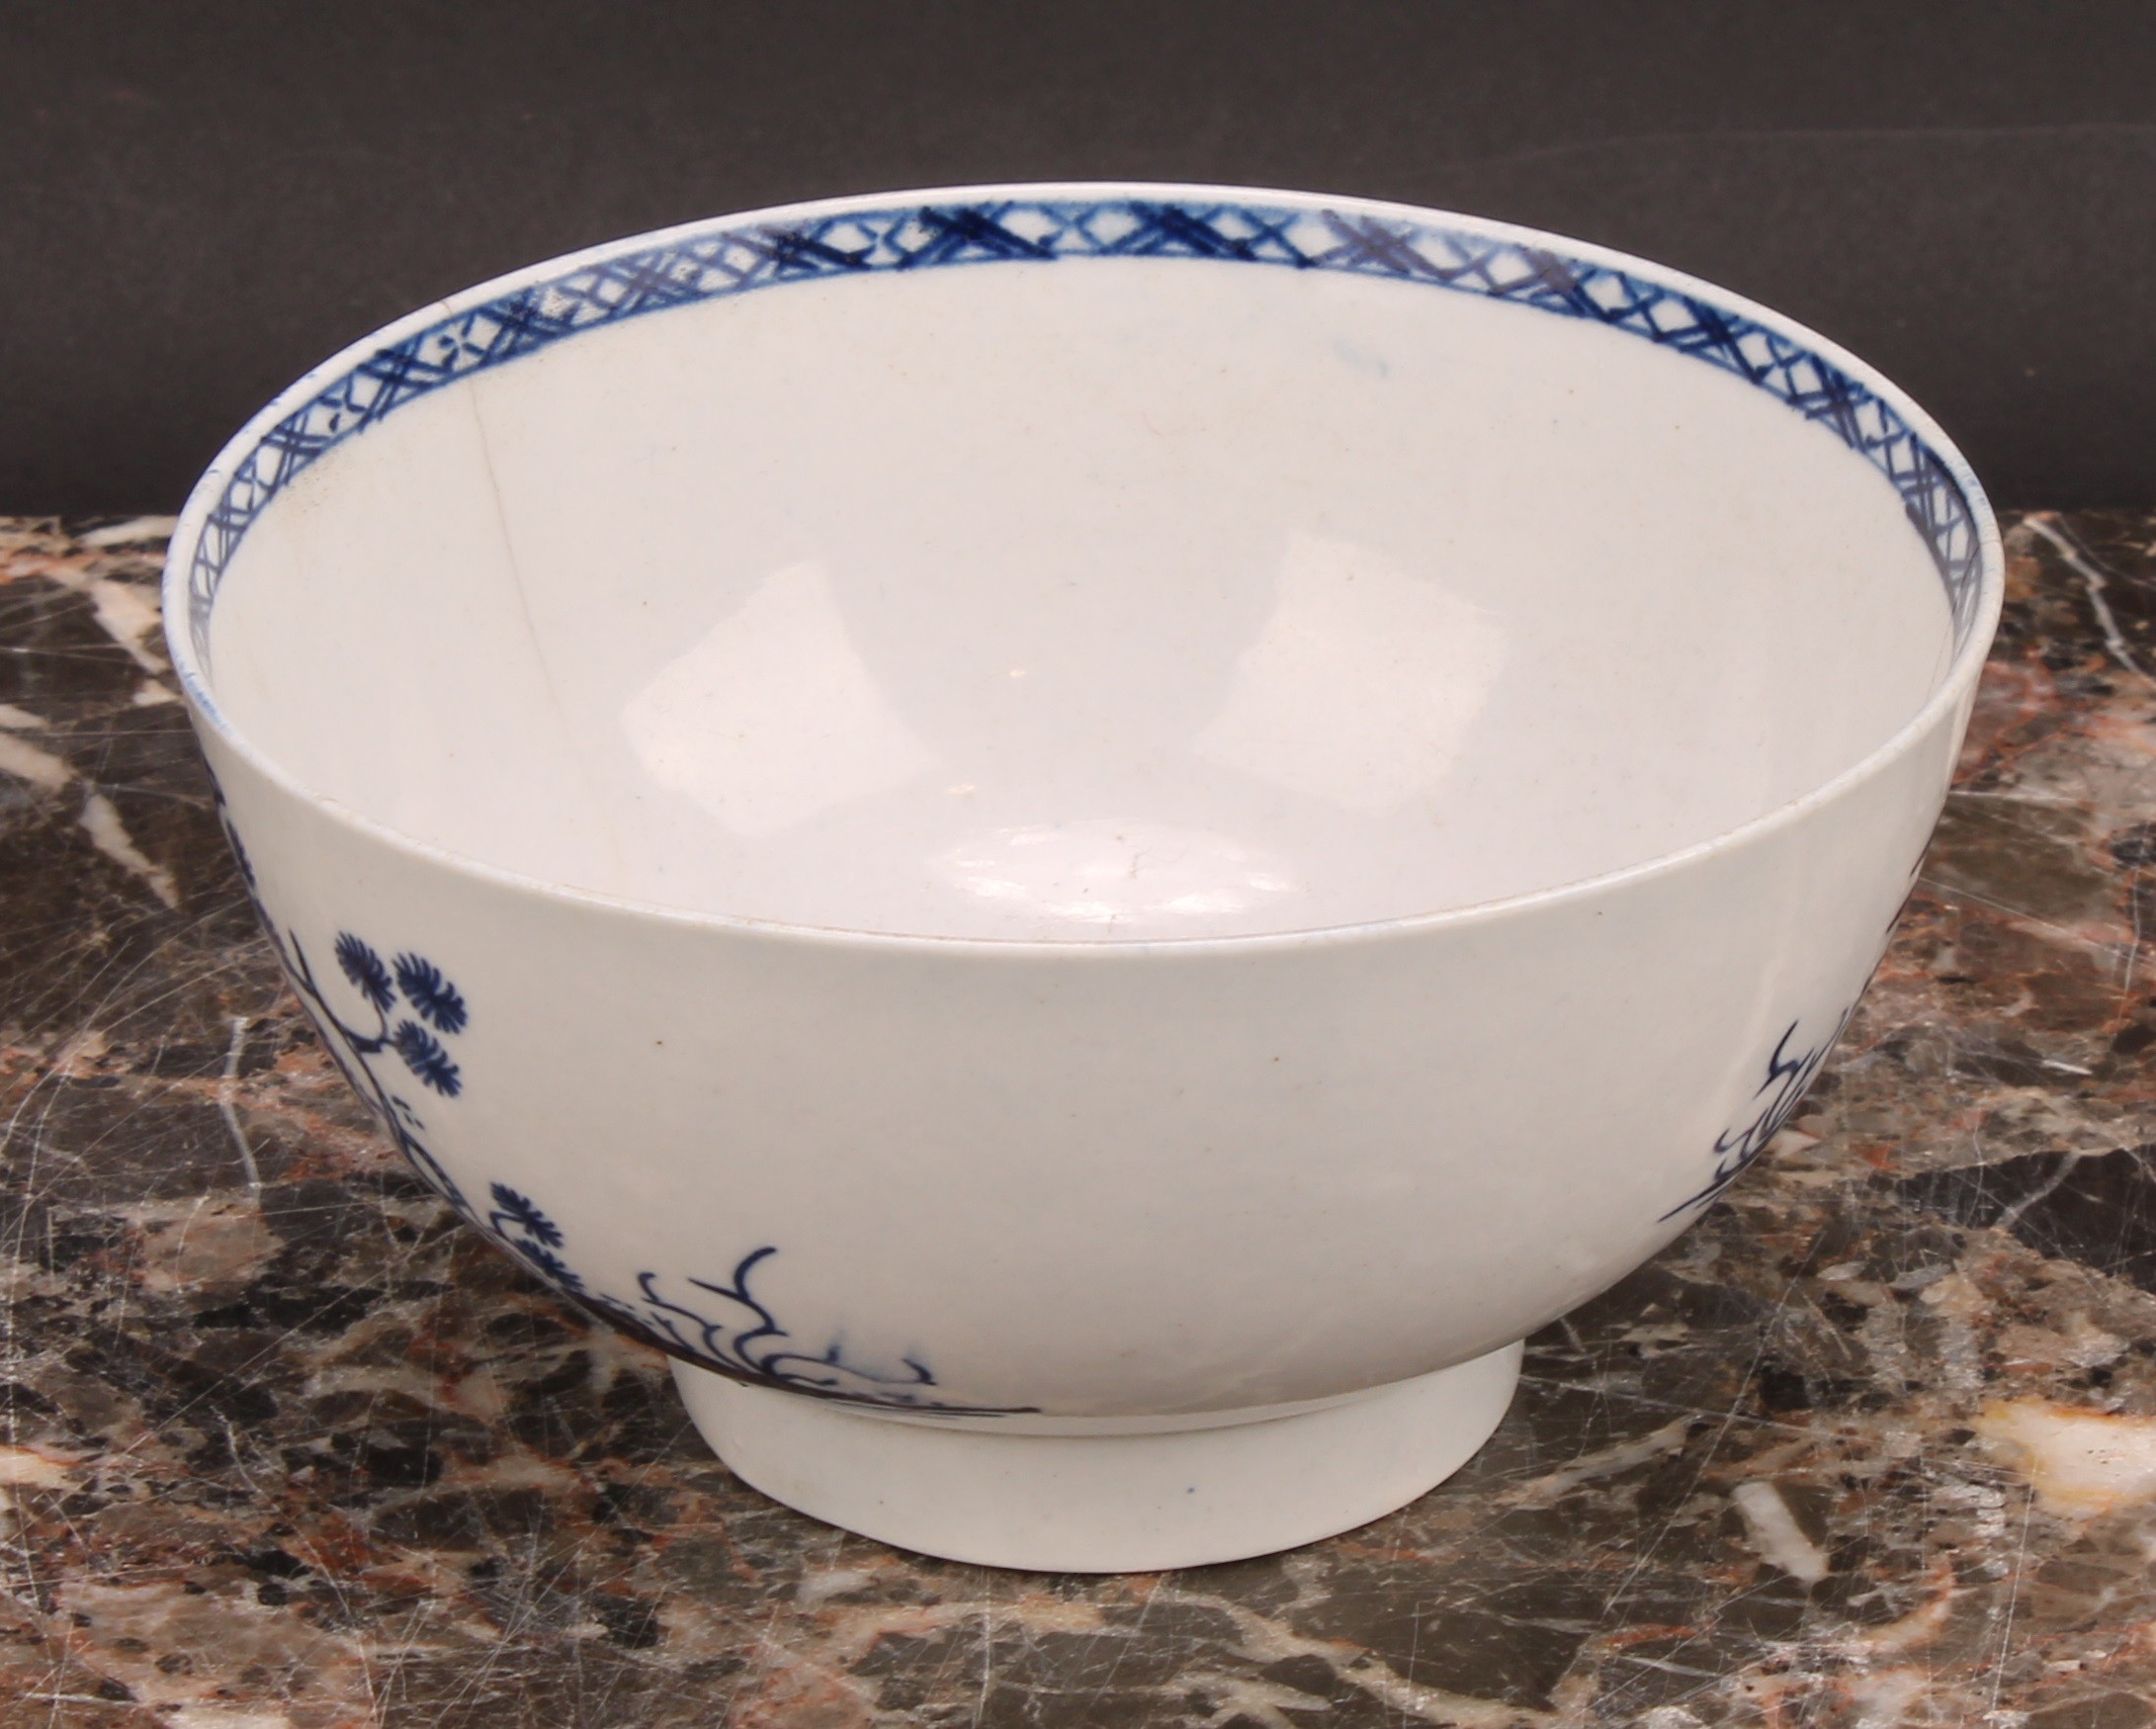 A Chaffers Liverpool punch bowl, painted in Chinoiserie style in underglaze blue, with a - Image 9 of 11